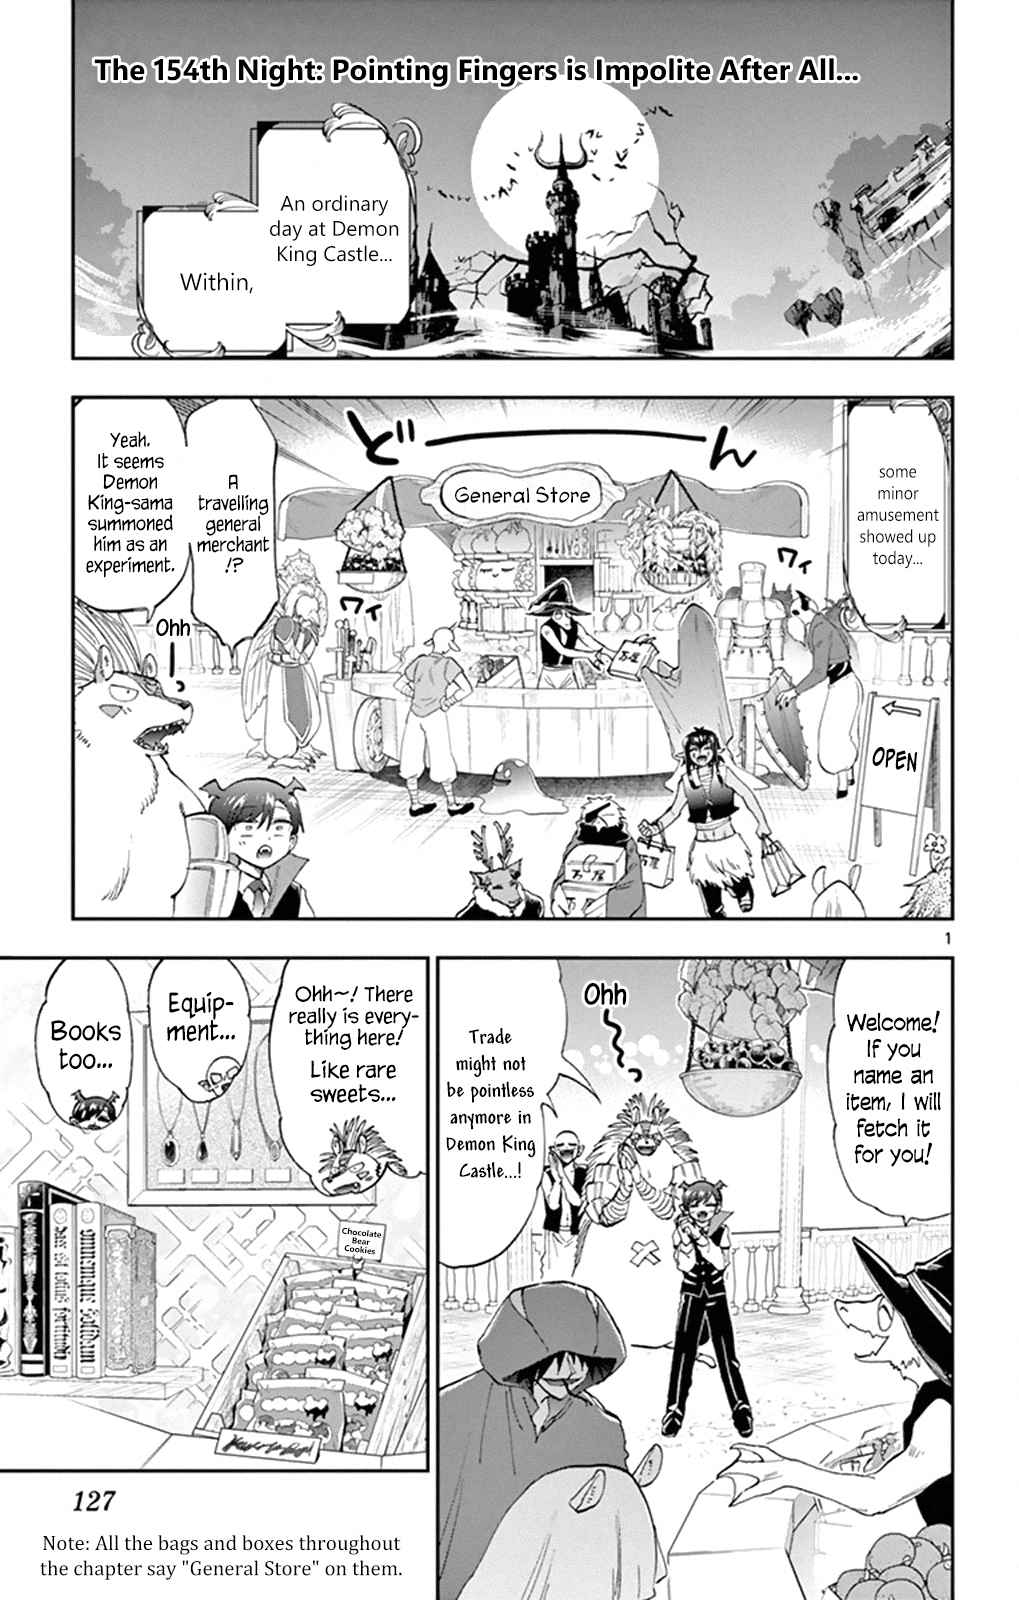 Maou jou de Oyasumi Vol. 12 Ch. 154 Pointing Fingers is Impolite After All...